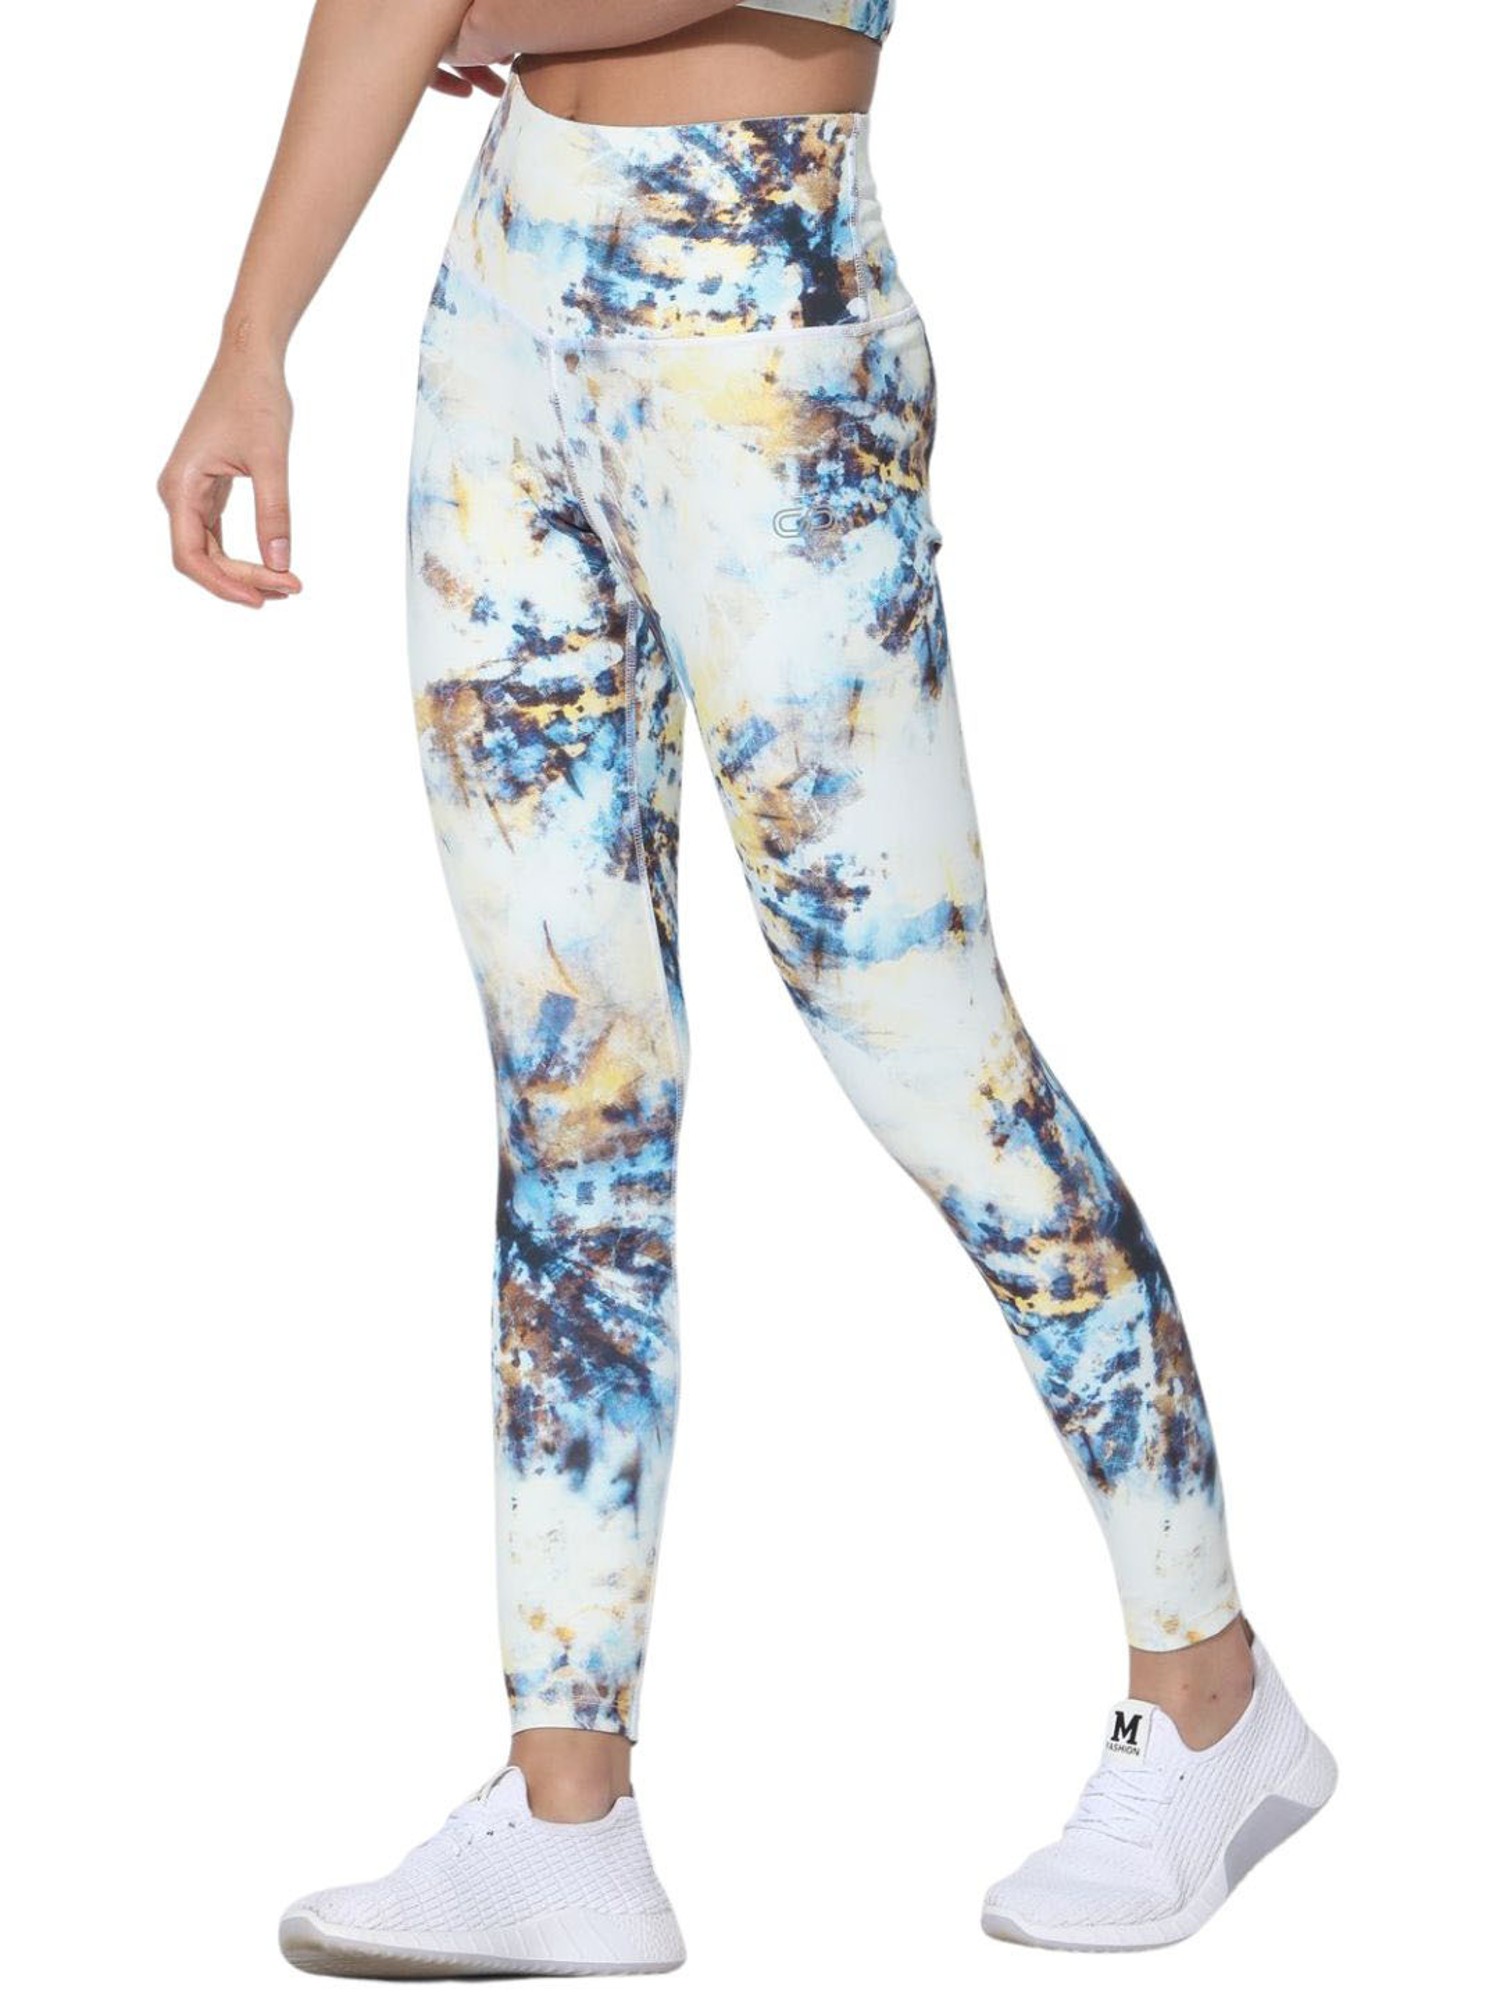 SILVERTRAQ Yellow Relaxed Fit Leggings